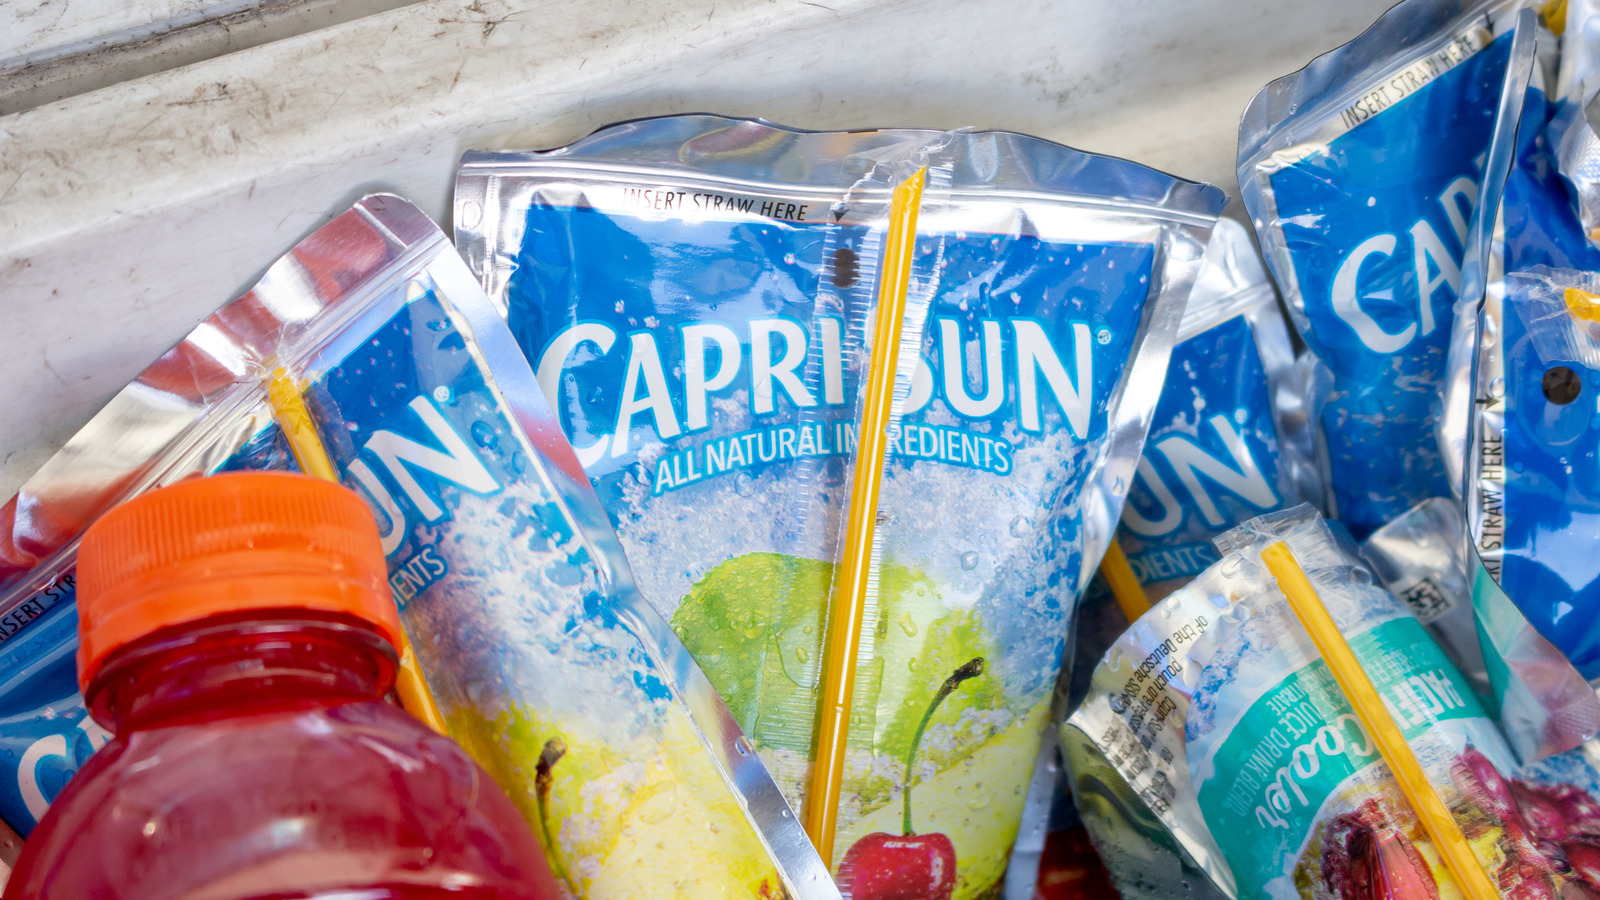 https://www.thedailymeal.com/img/gallery/costco-is-kicking-off-summer-with-a-very-adult-version-of-capri-sun/l-intro-1682106194.jpg